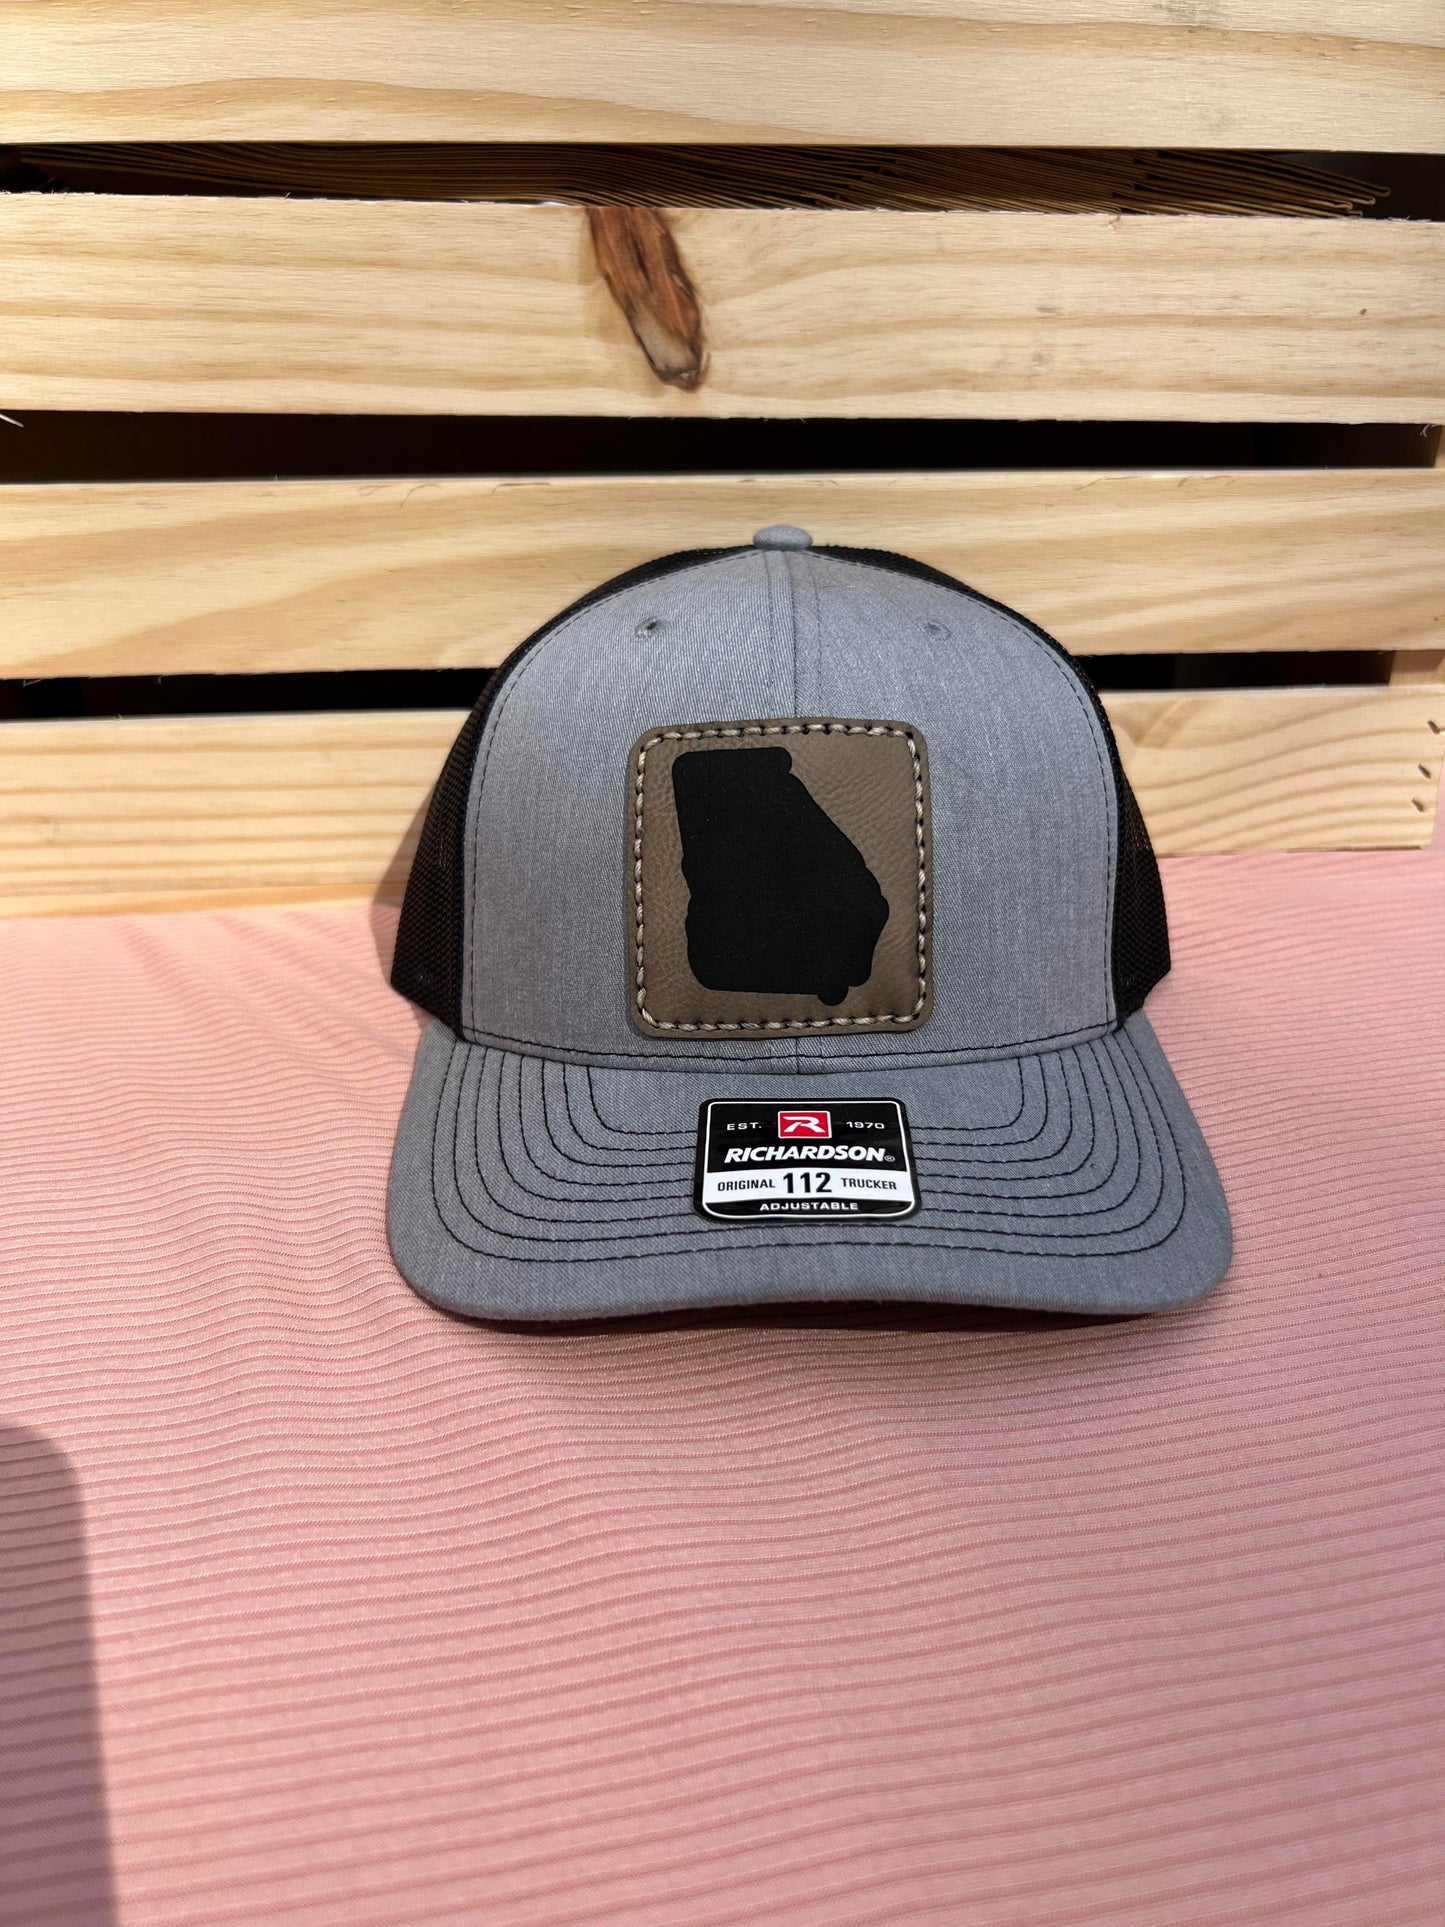 State of Georgia Richardson 112 leather patch hat